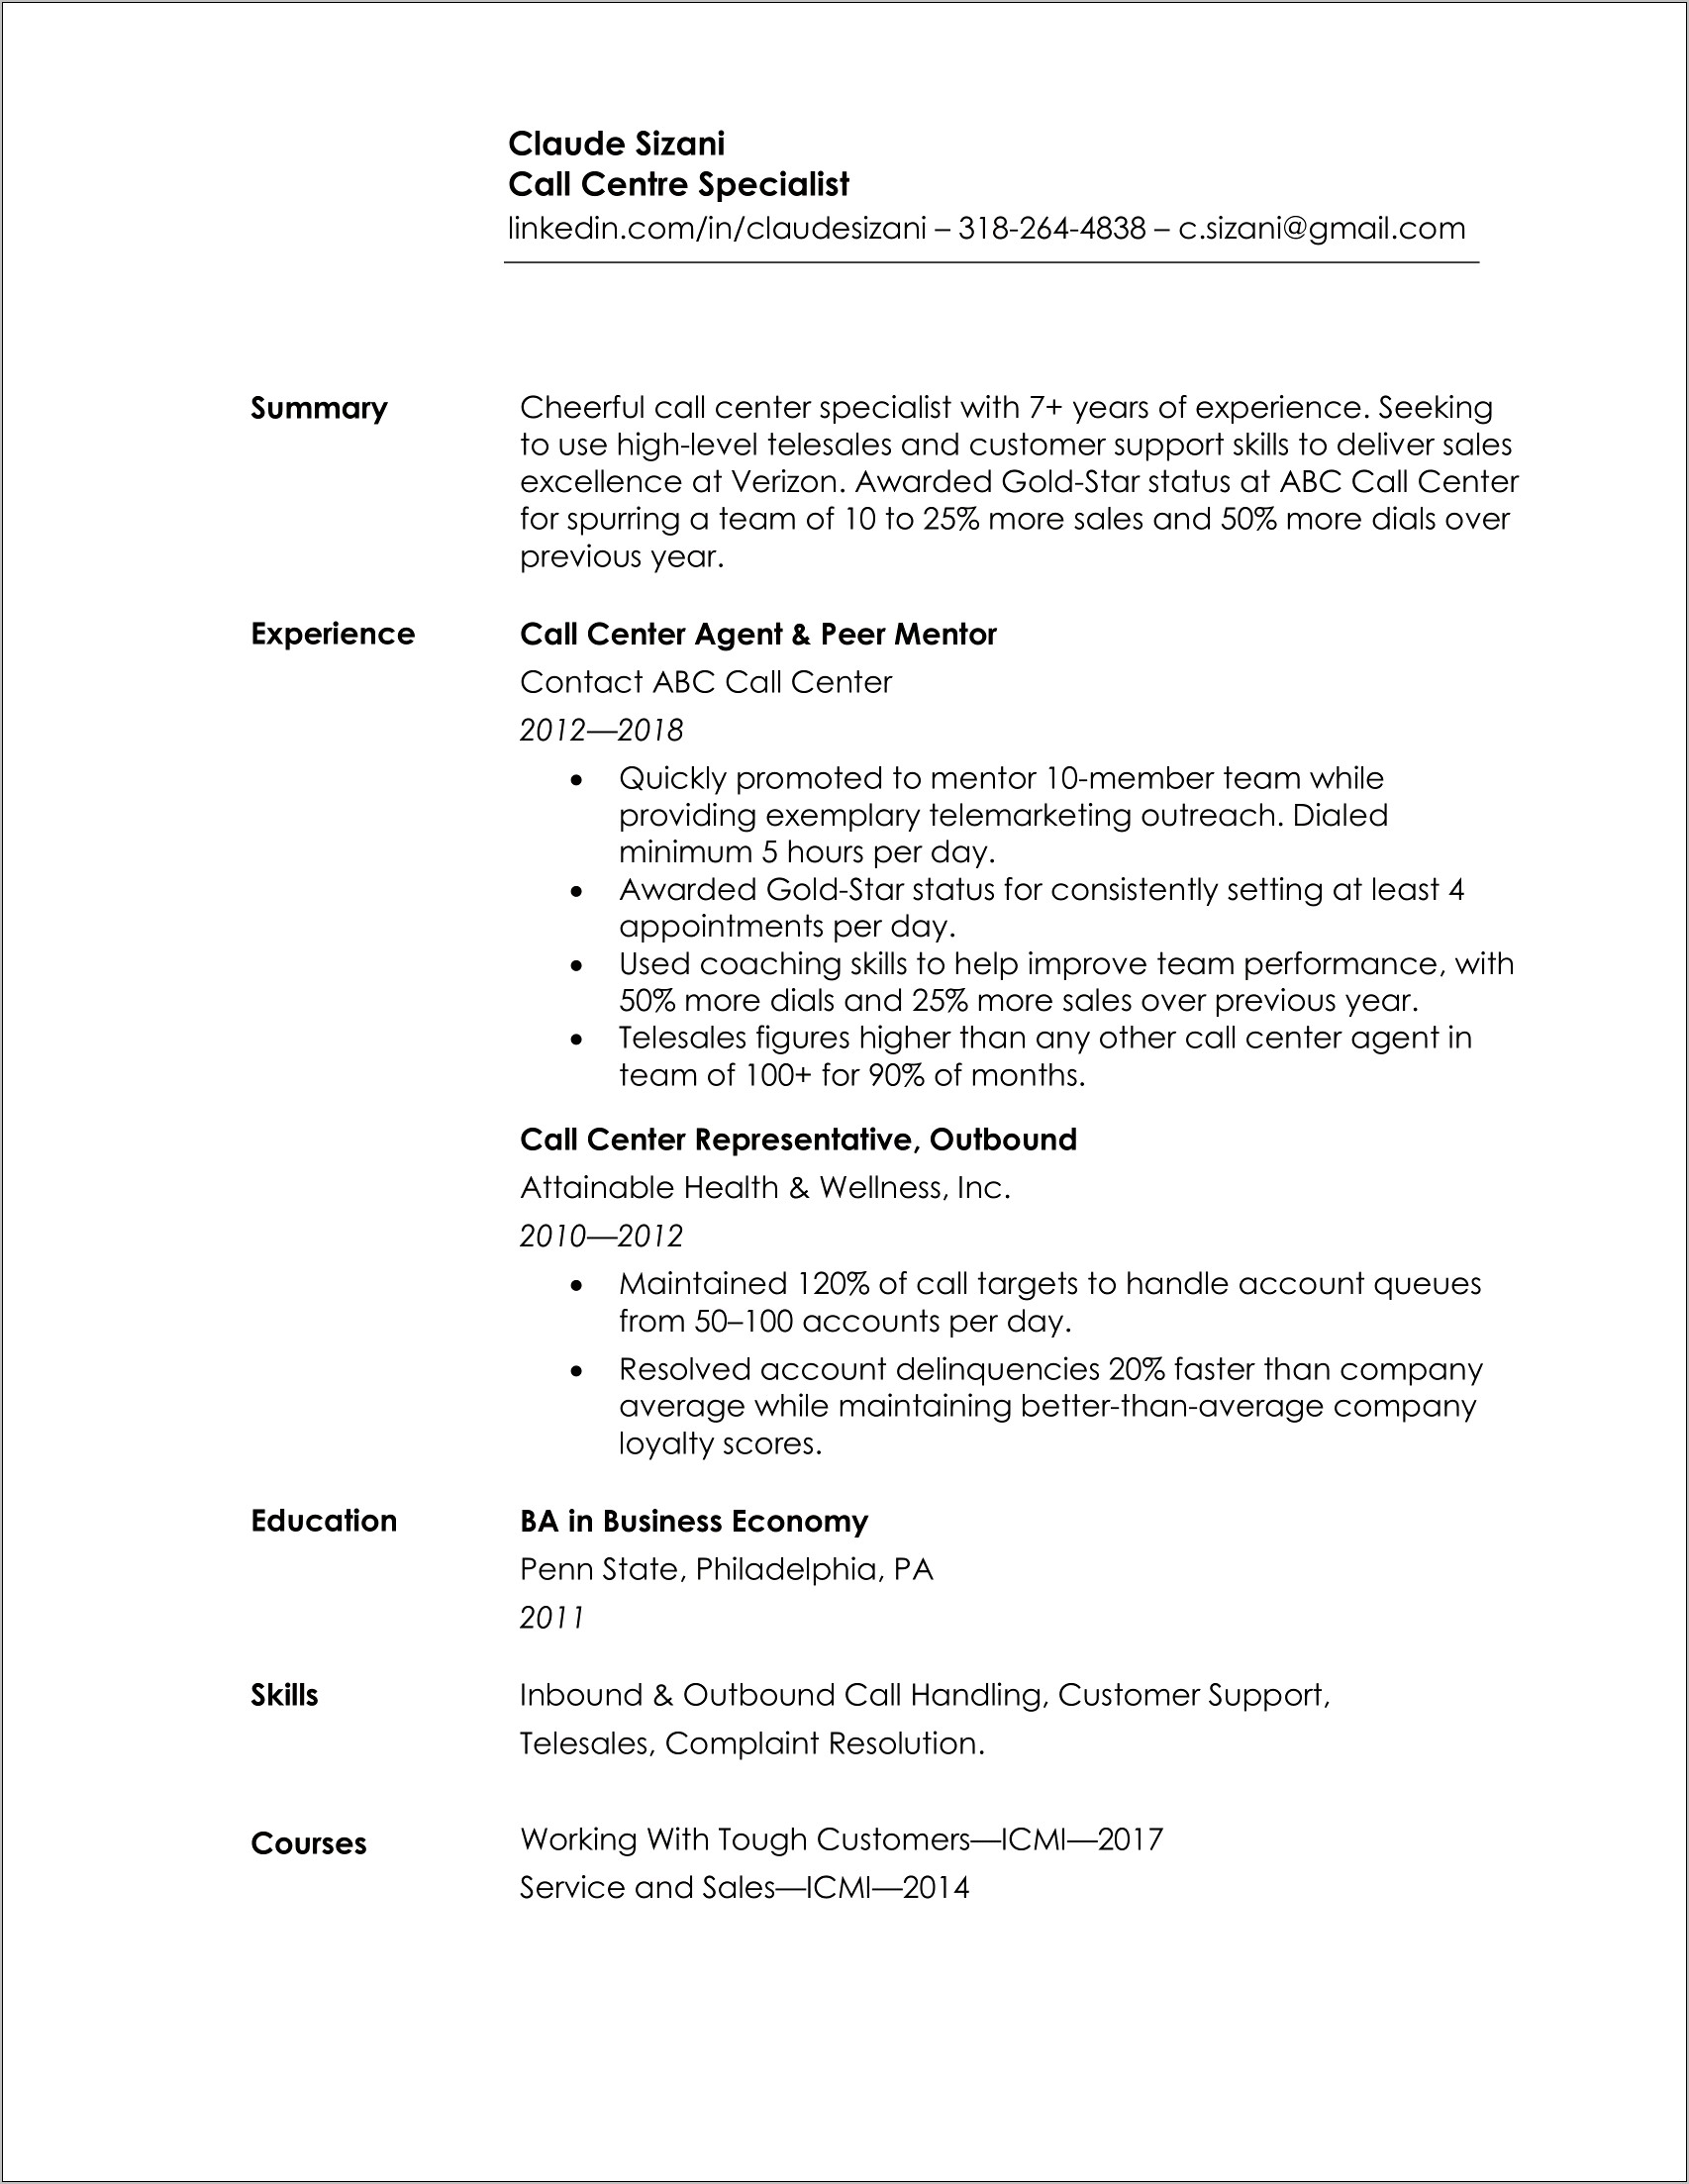 Is It Good Idea To Use Resume Tamplate